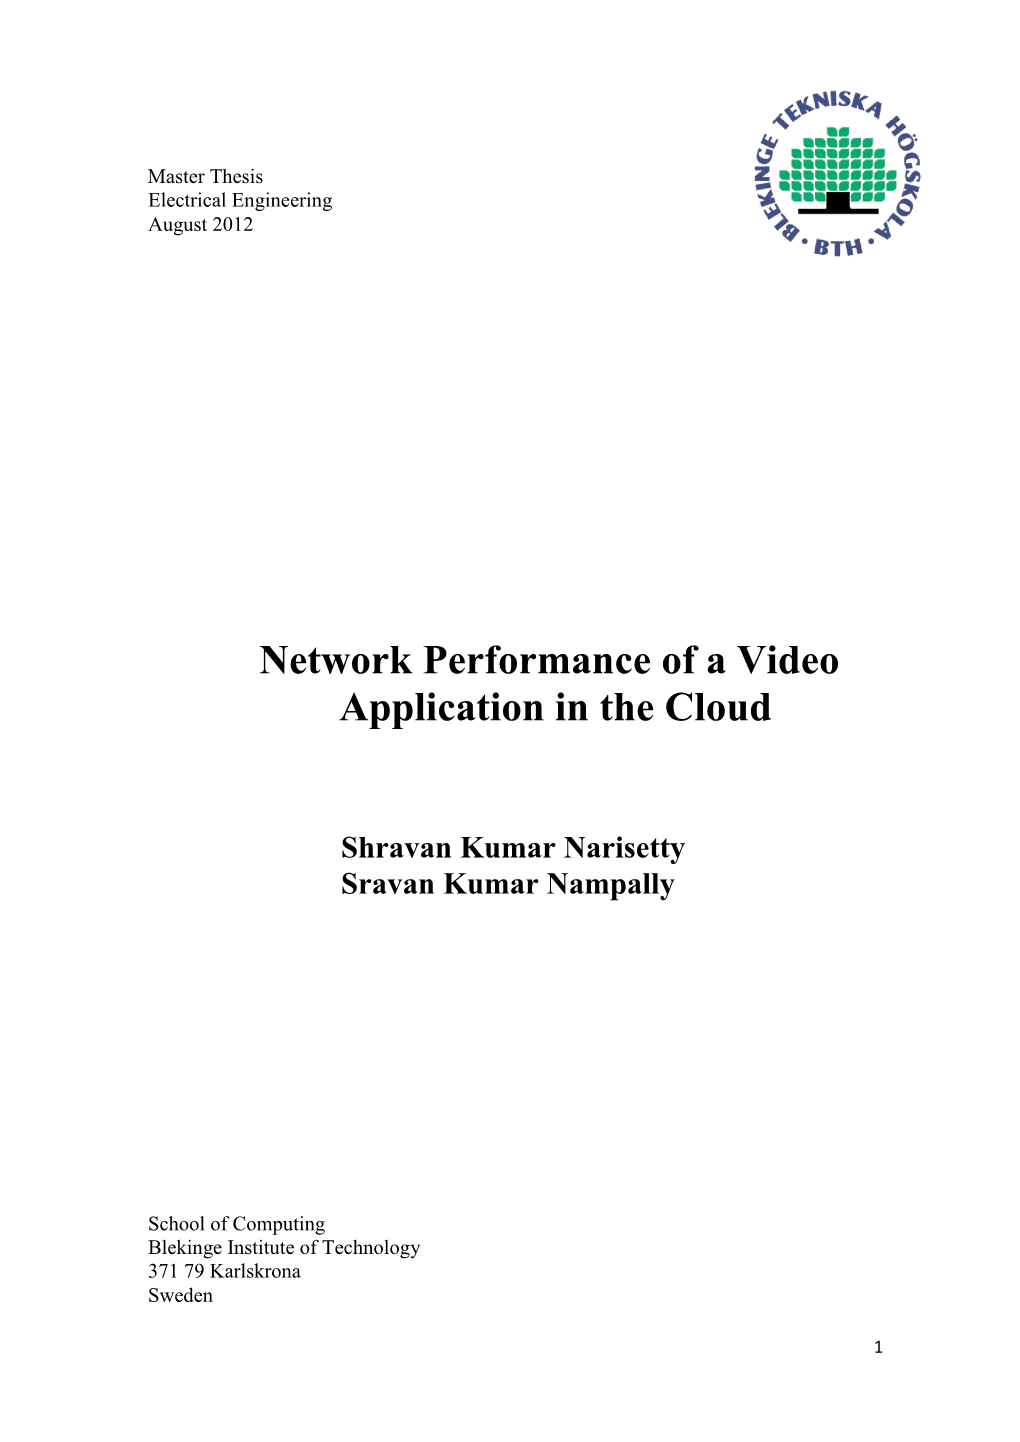 Network Performance of a Video Application in the Cloud